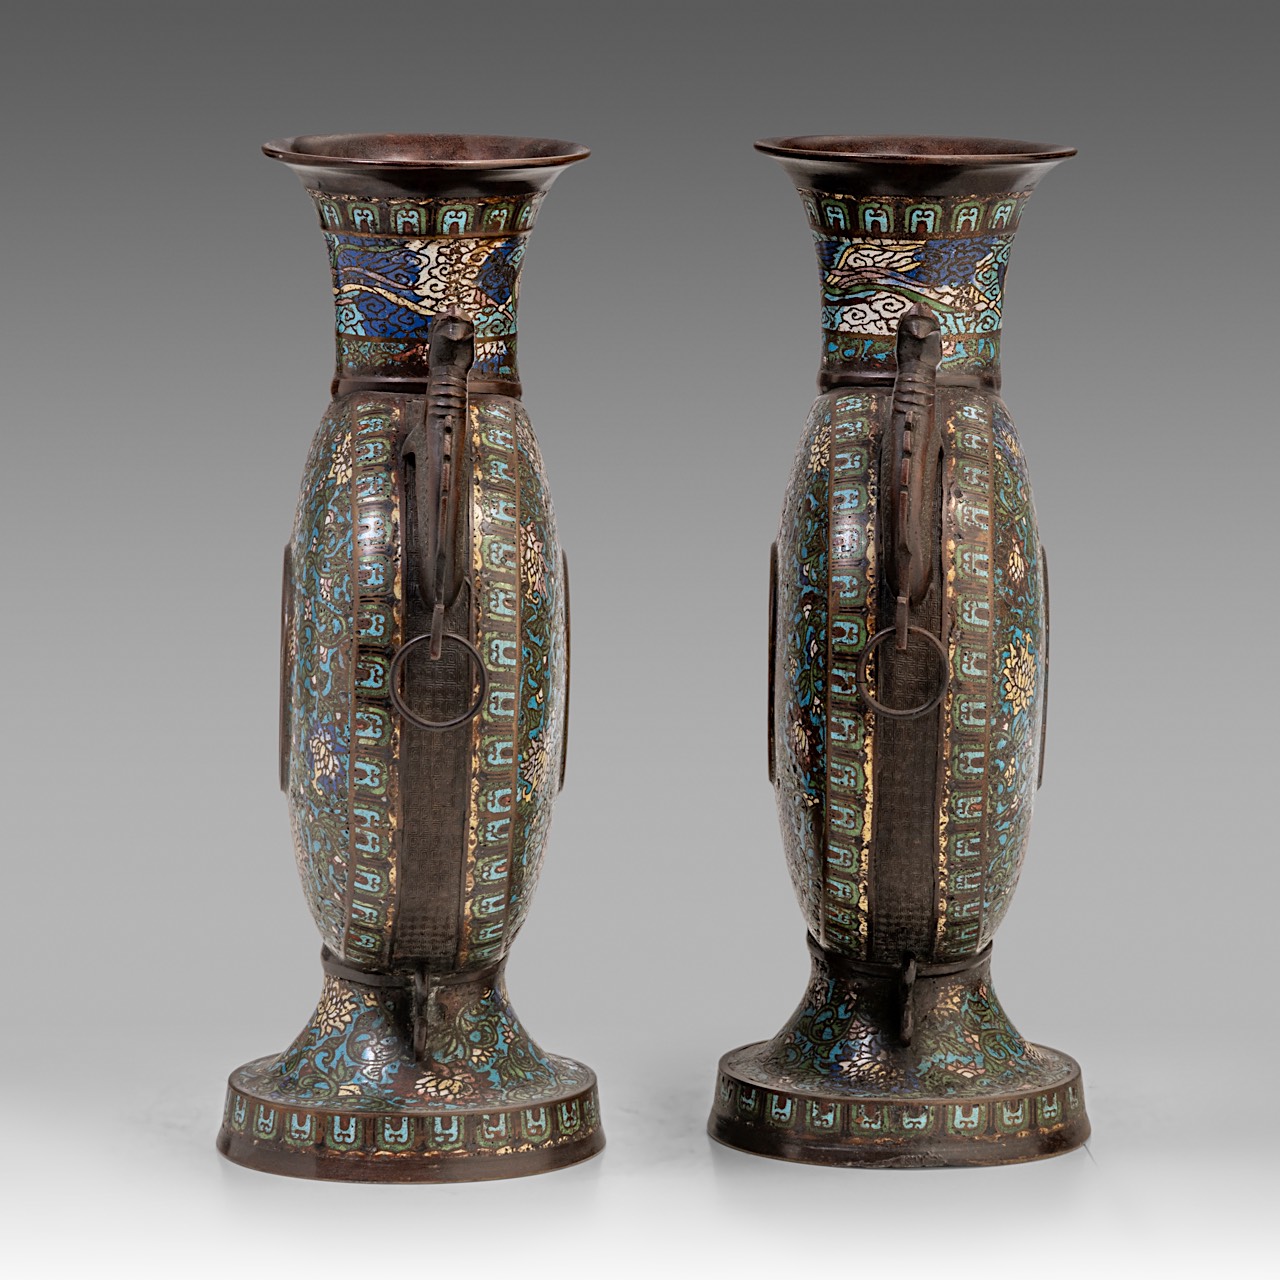 A pair of Japanese champleve enamelled bronze moonflask vases, late Meiji (1868-1912), H 50 cm - Image 4 of 11